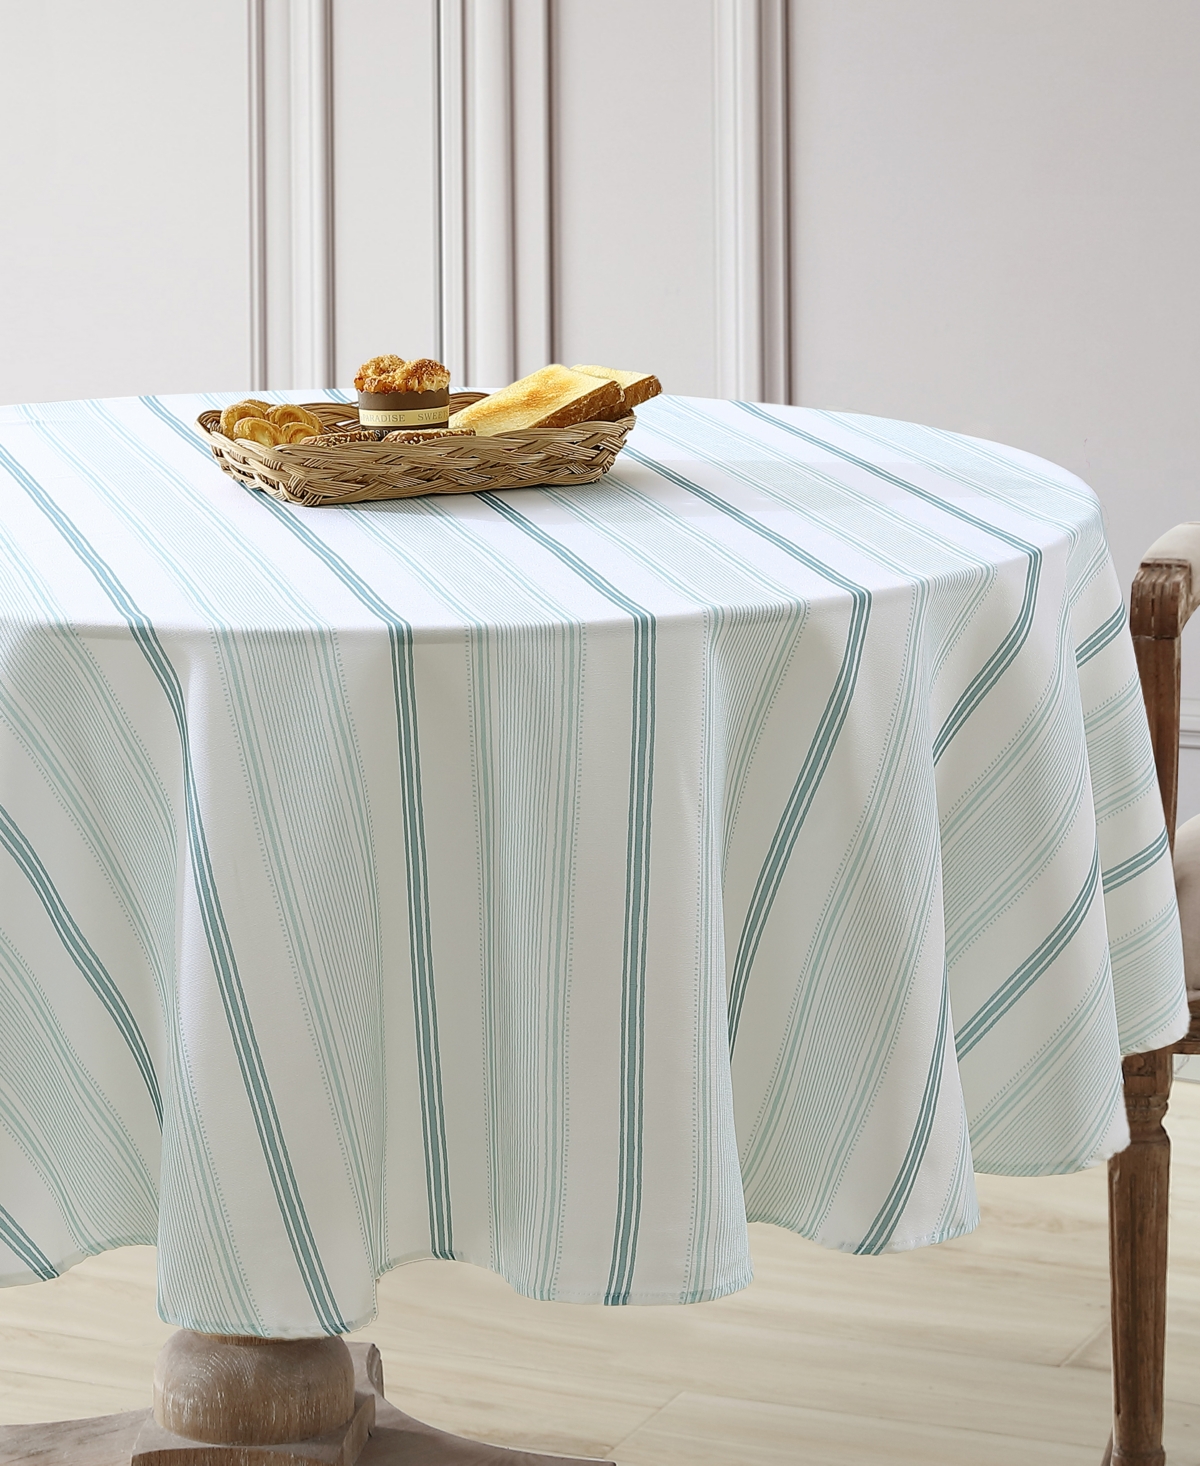 Laura Ashley Easy Care Tablecloth, 70" Round In Teal Stripe